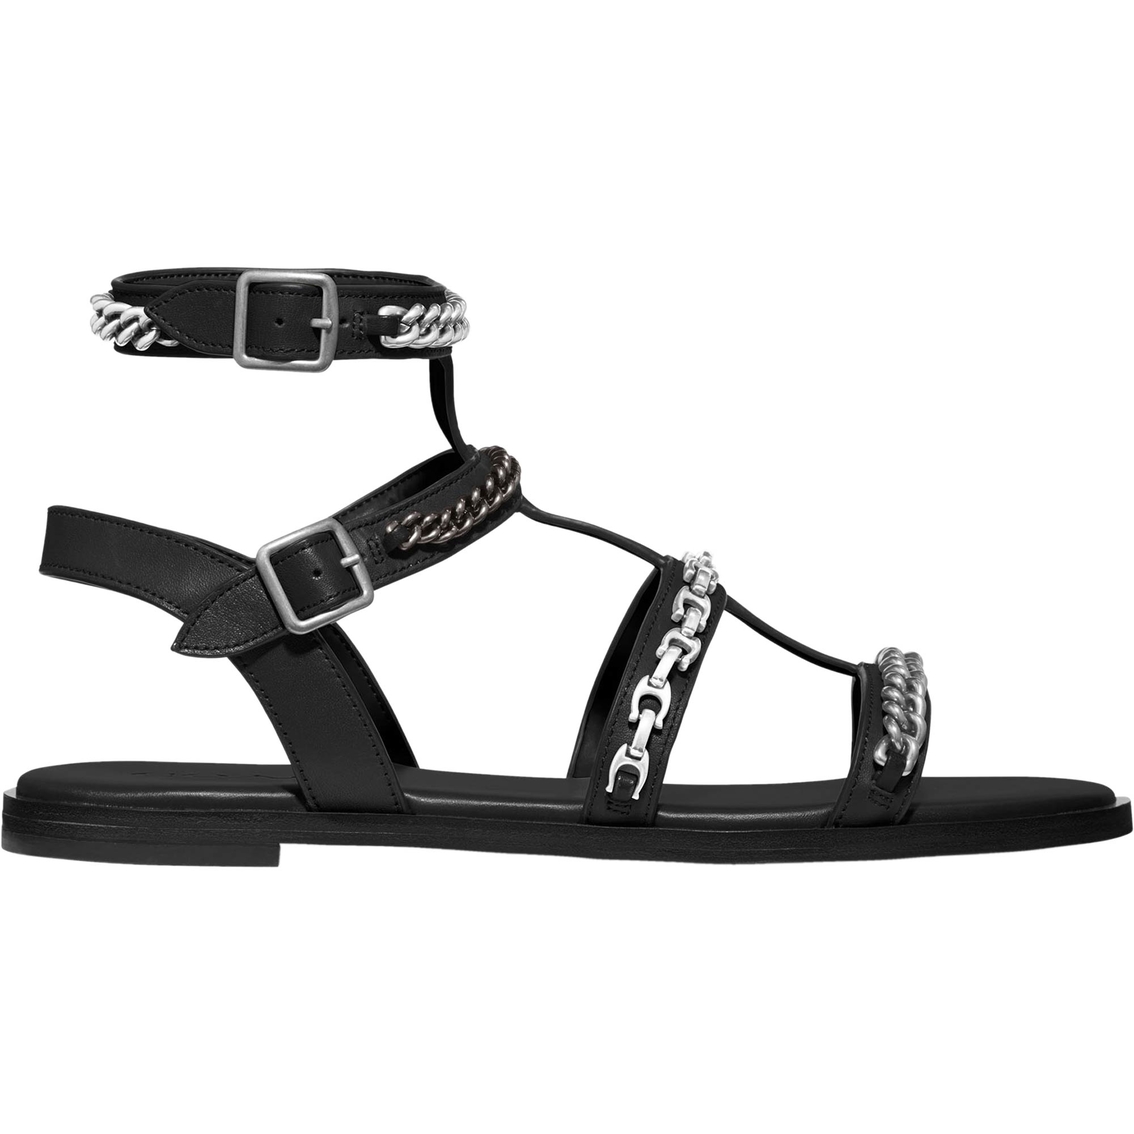 Coach Haddie Flat Gladiator Sandals | Flats | Shoes | Shop The Exchange